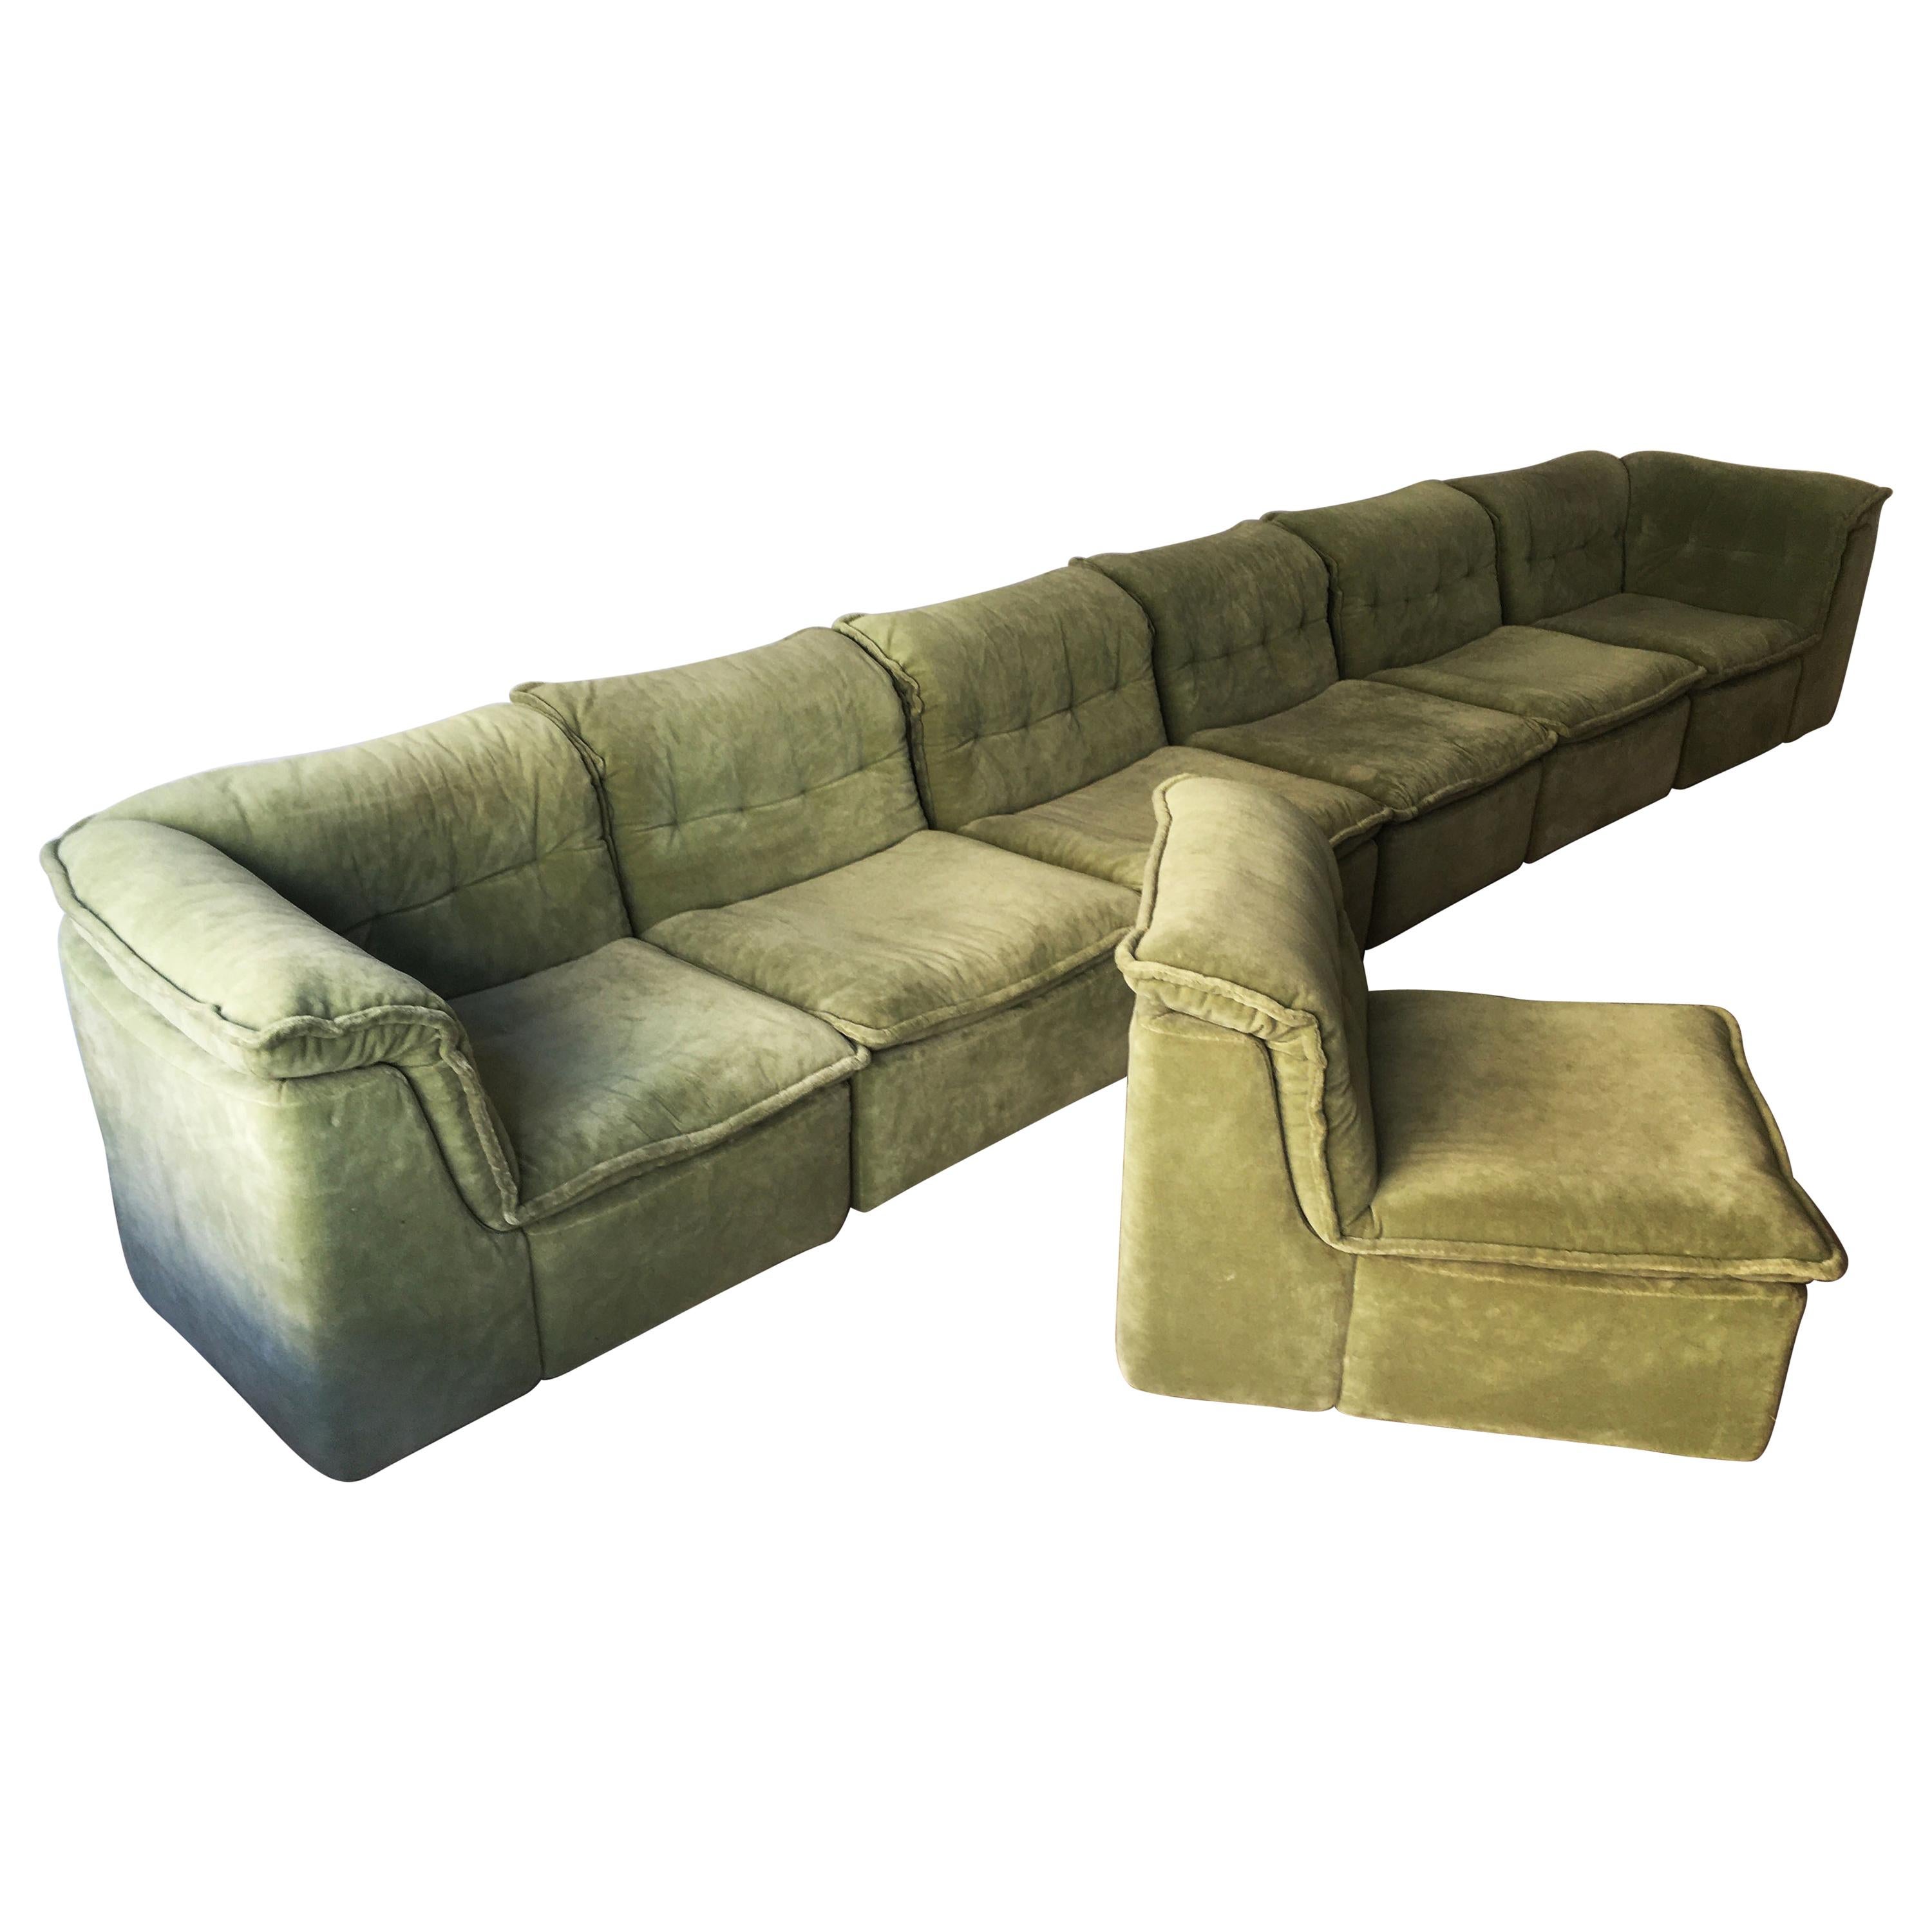 Vintage Rolf Benz Modular Sectional Sofa Suite, Germany, 1970